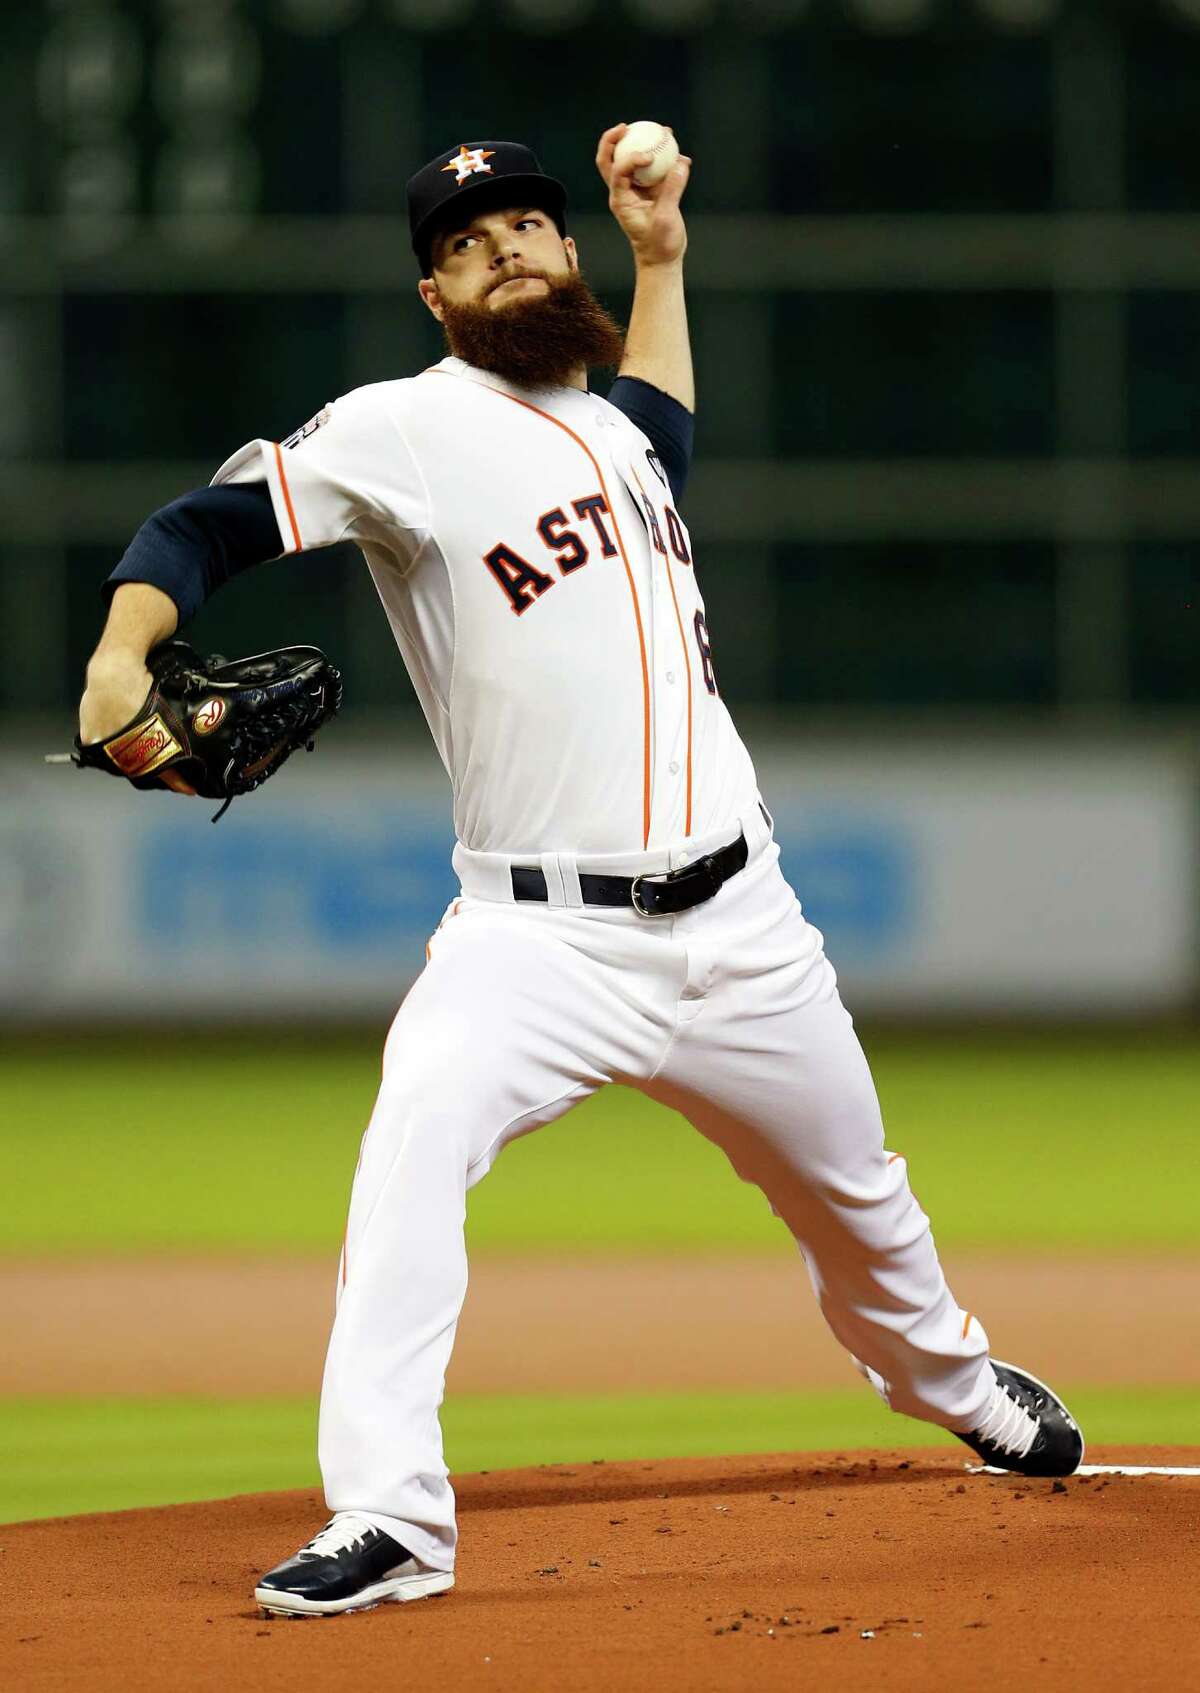 Coming off a game in Arlington in which he allowed nine runs, Dallas Keuchel showed more typical form Monday as he held the Angels to one run in 72/3 innings.